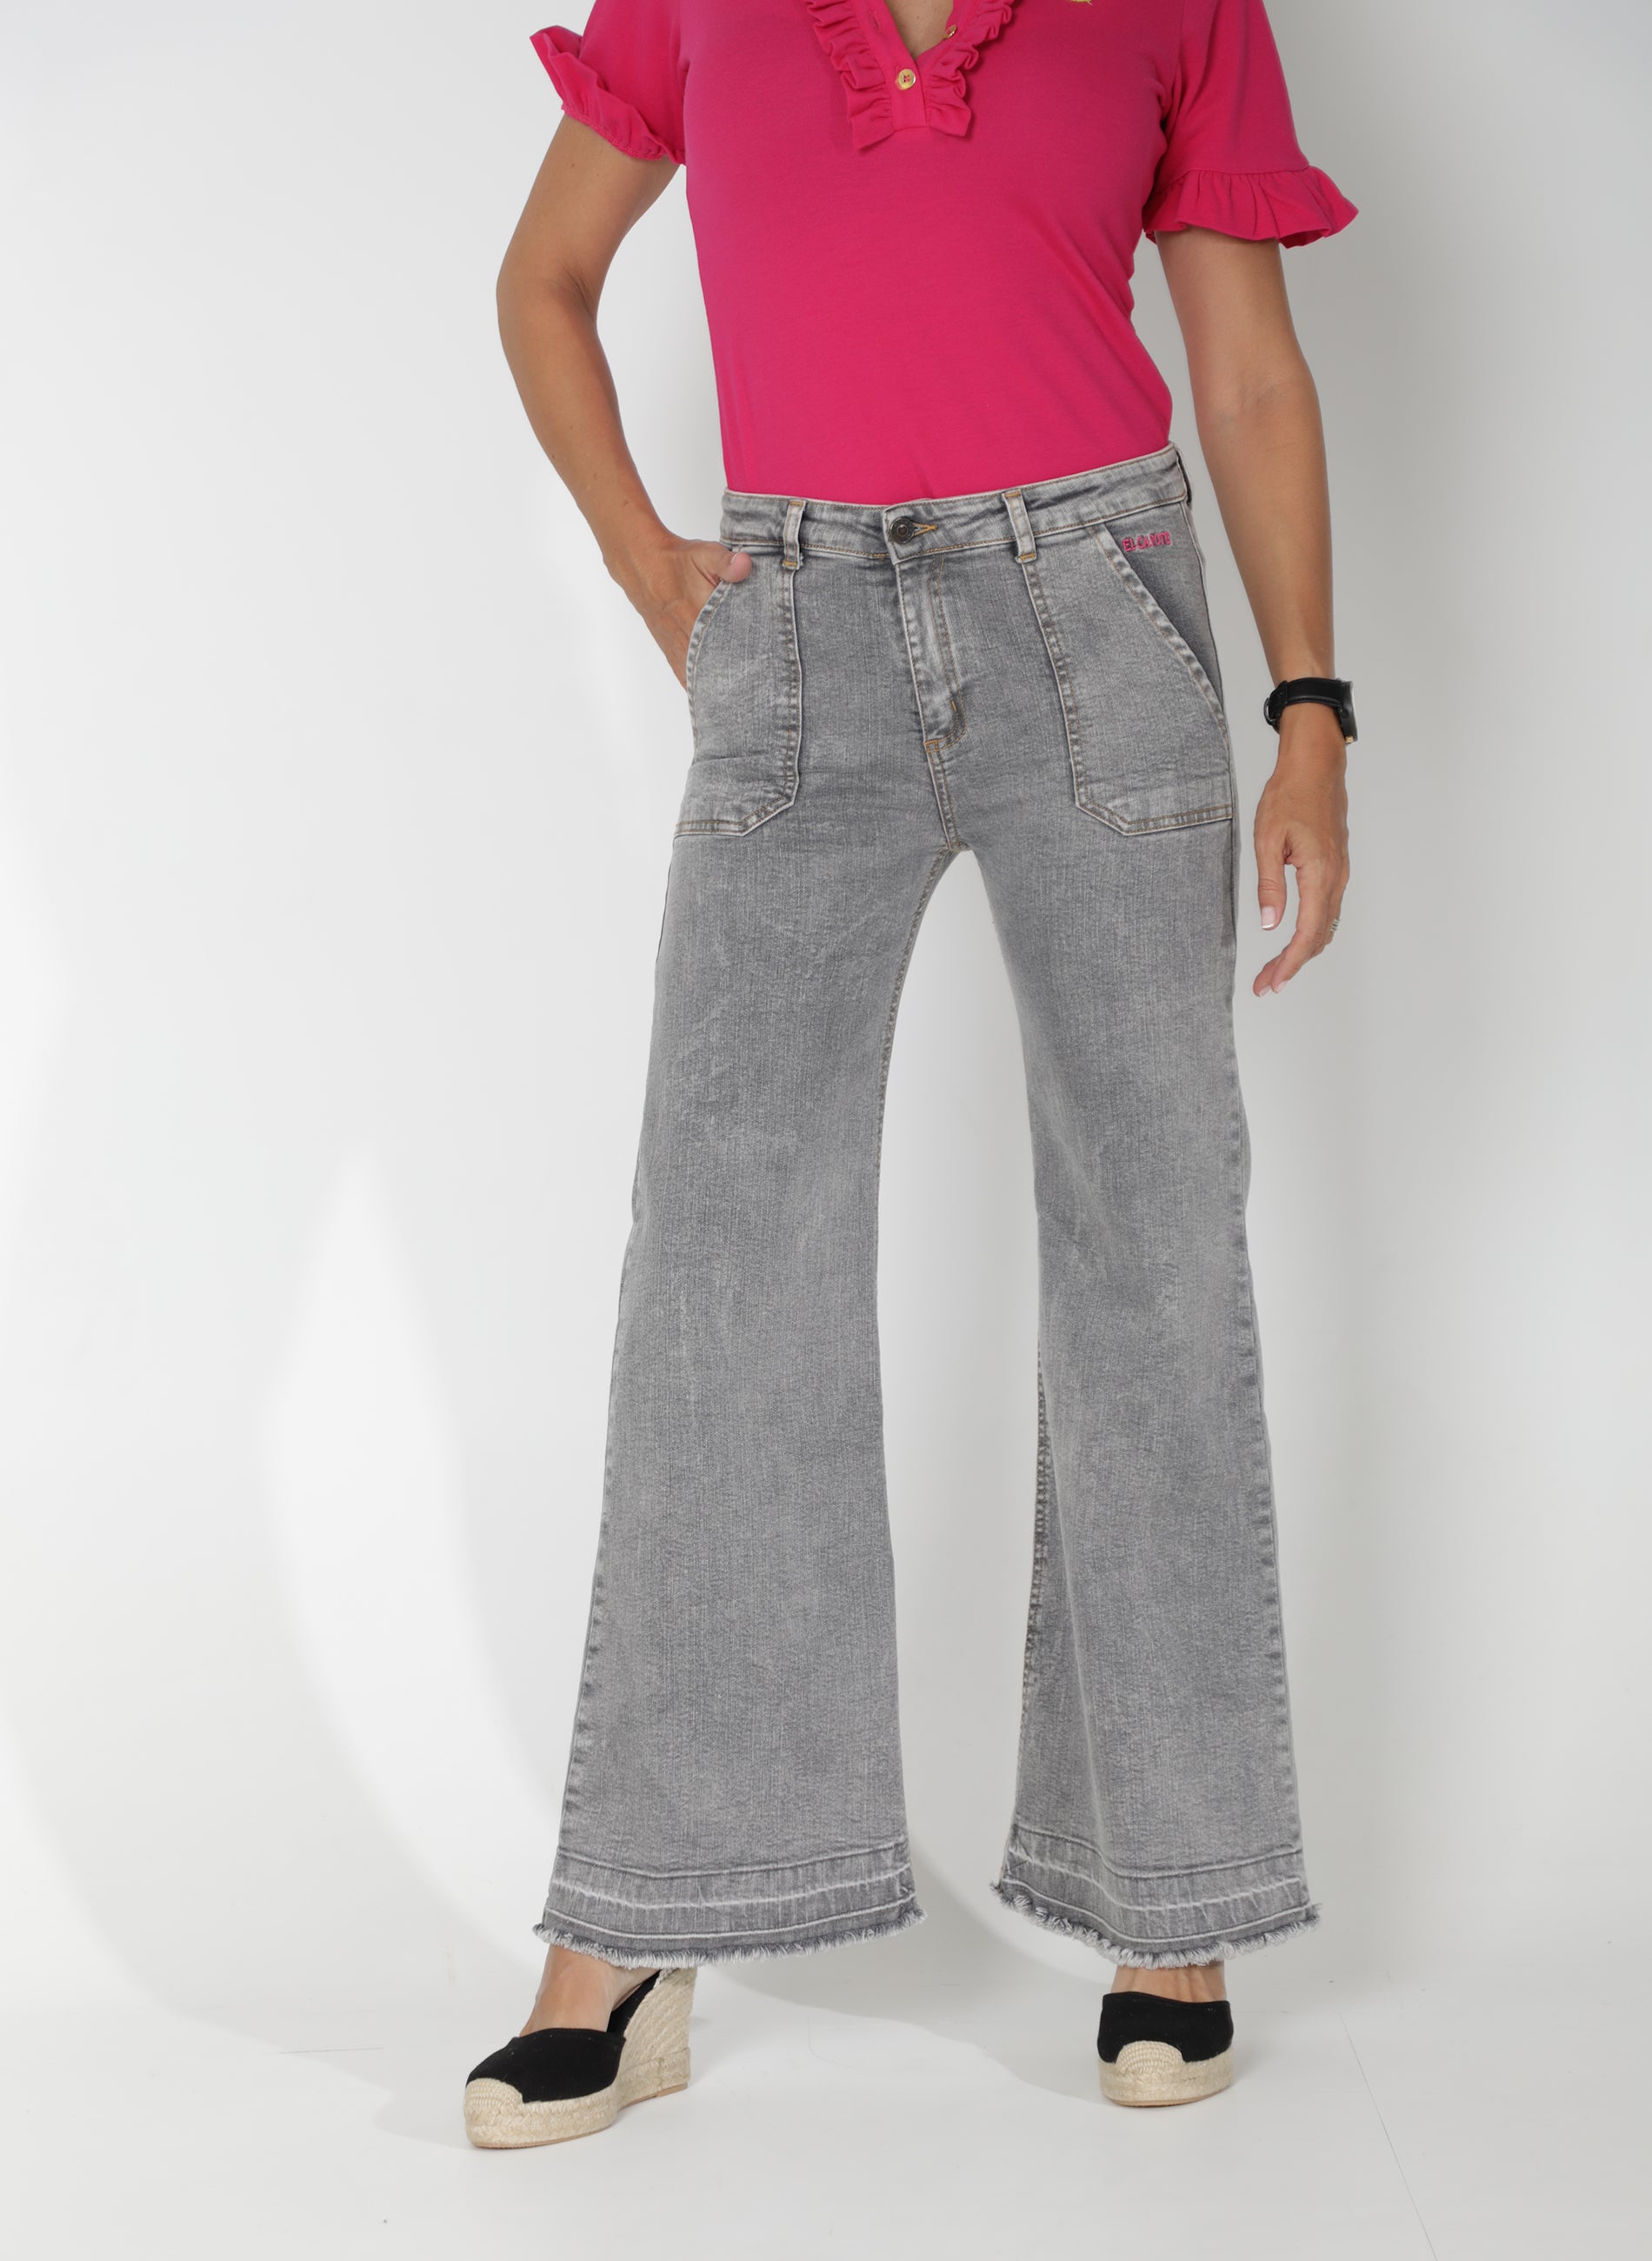 Women's Gray Front Pockets Jeans